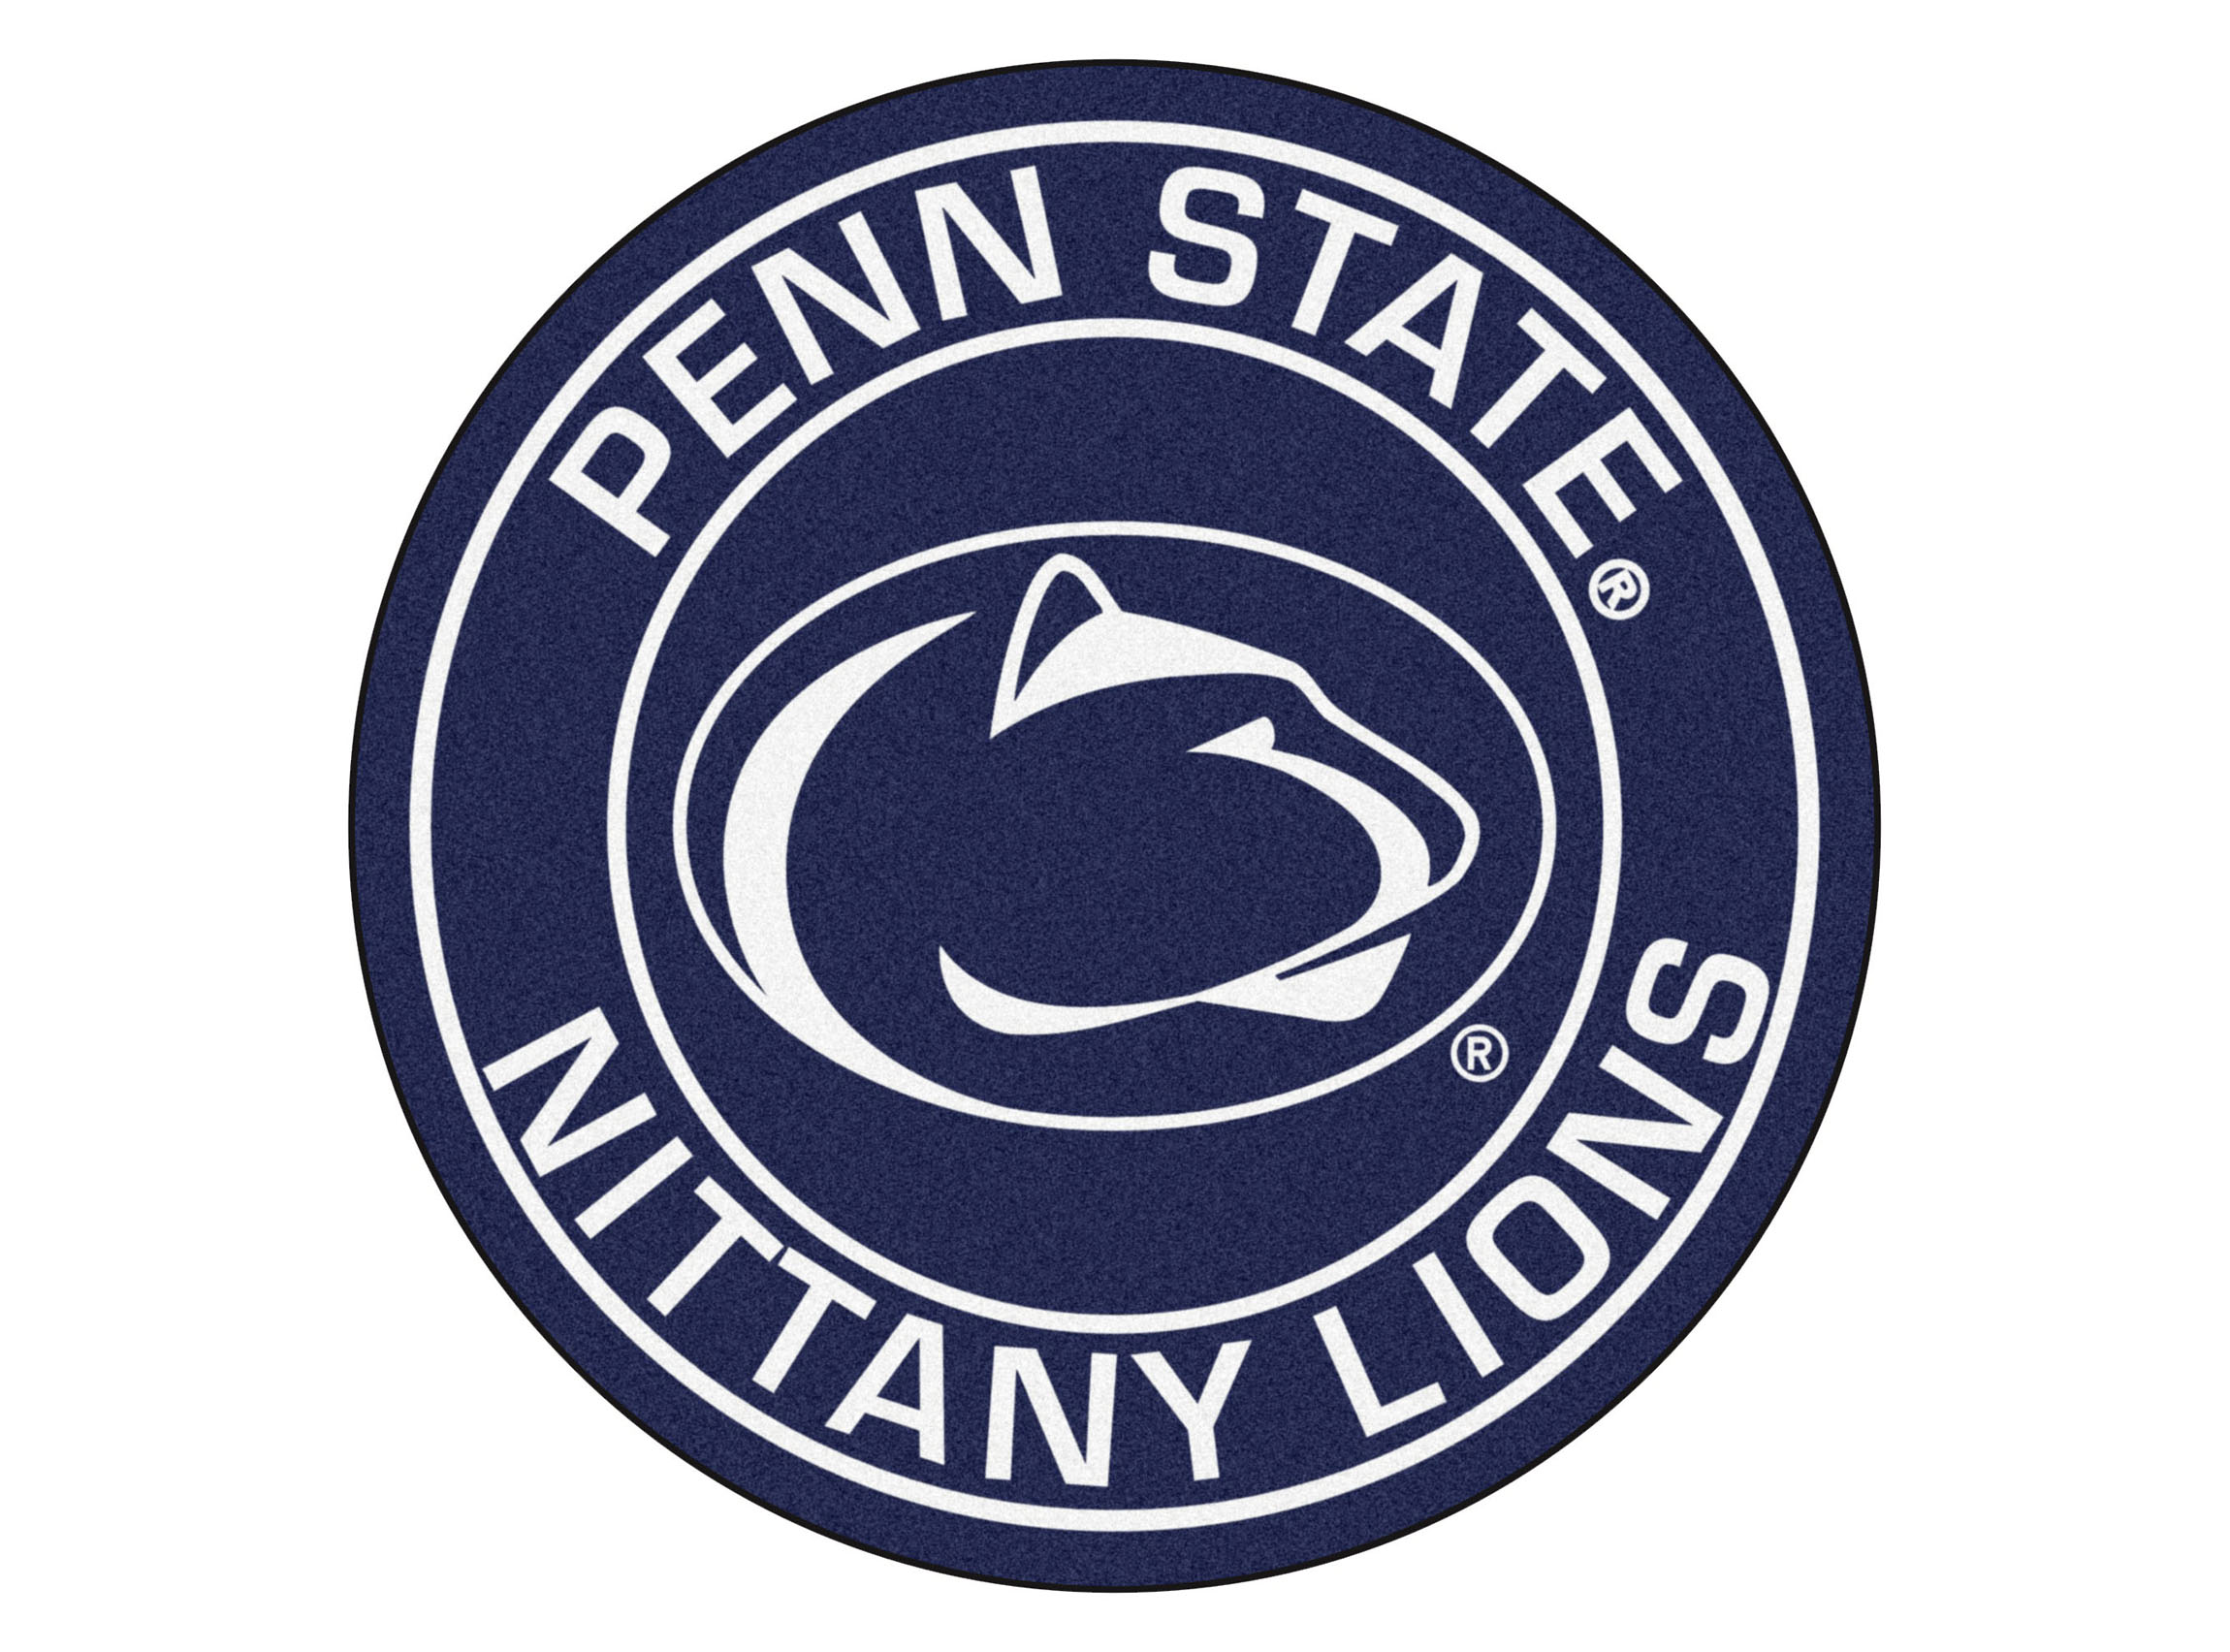 Meaning Penn State logo and symbol.